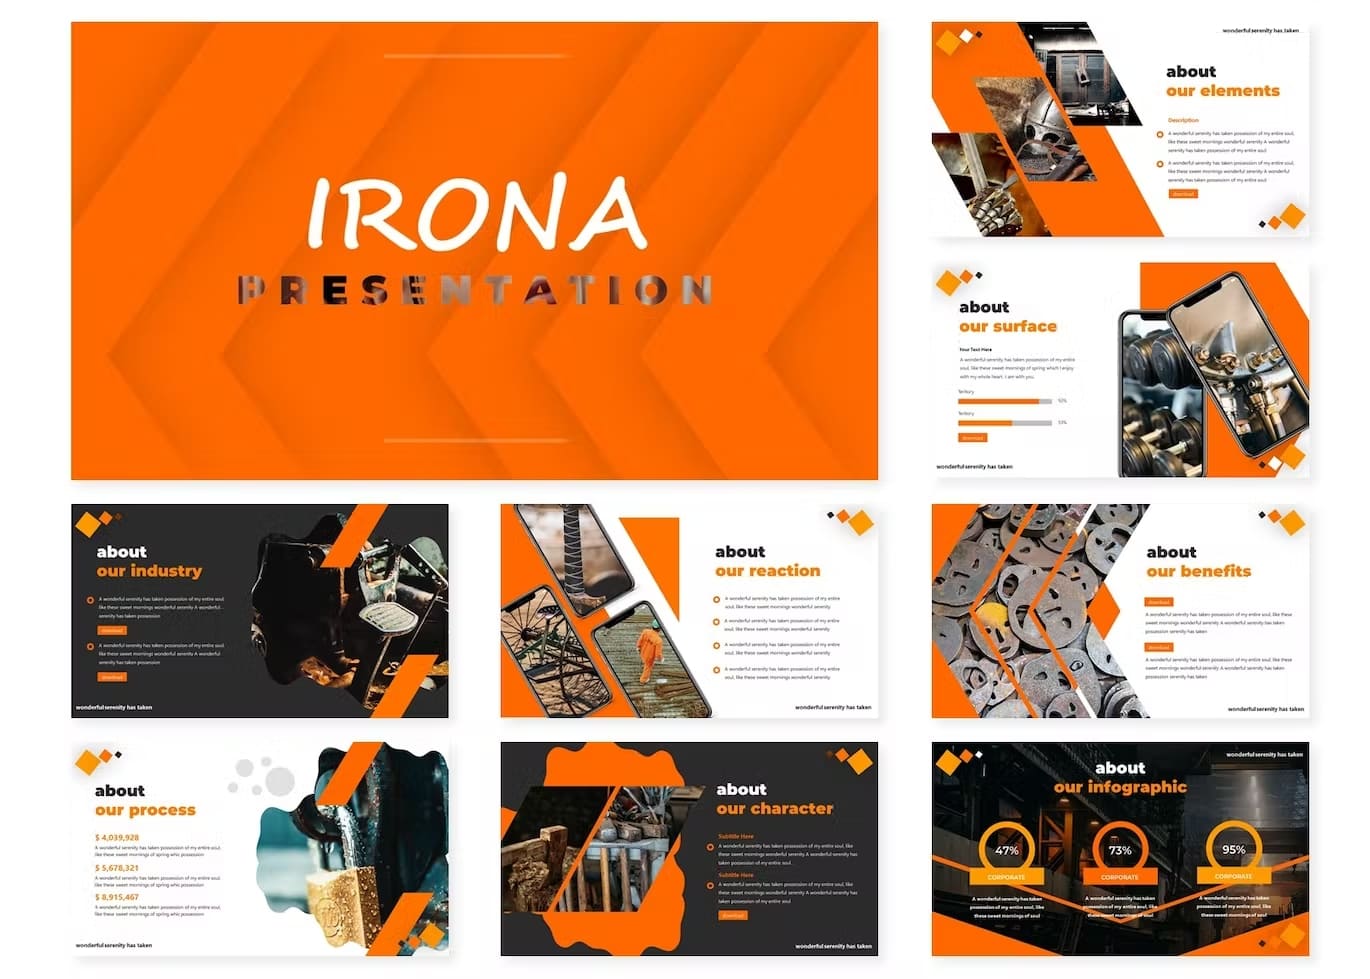 Nine Irony slides: Irony Presentation, About our elements, About our surface, About our industry.